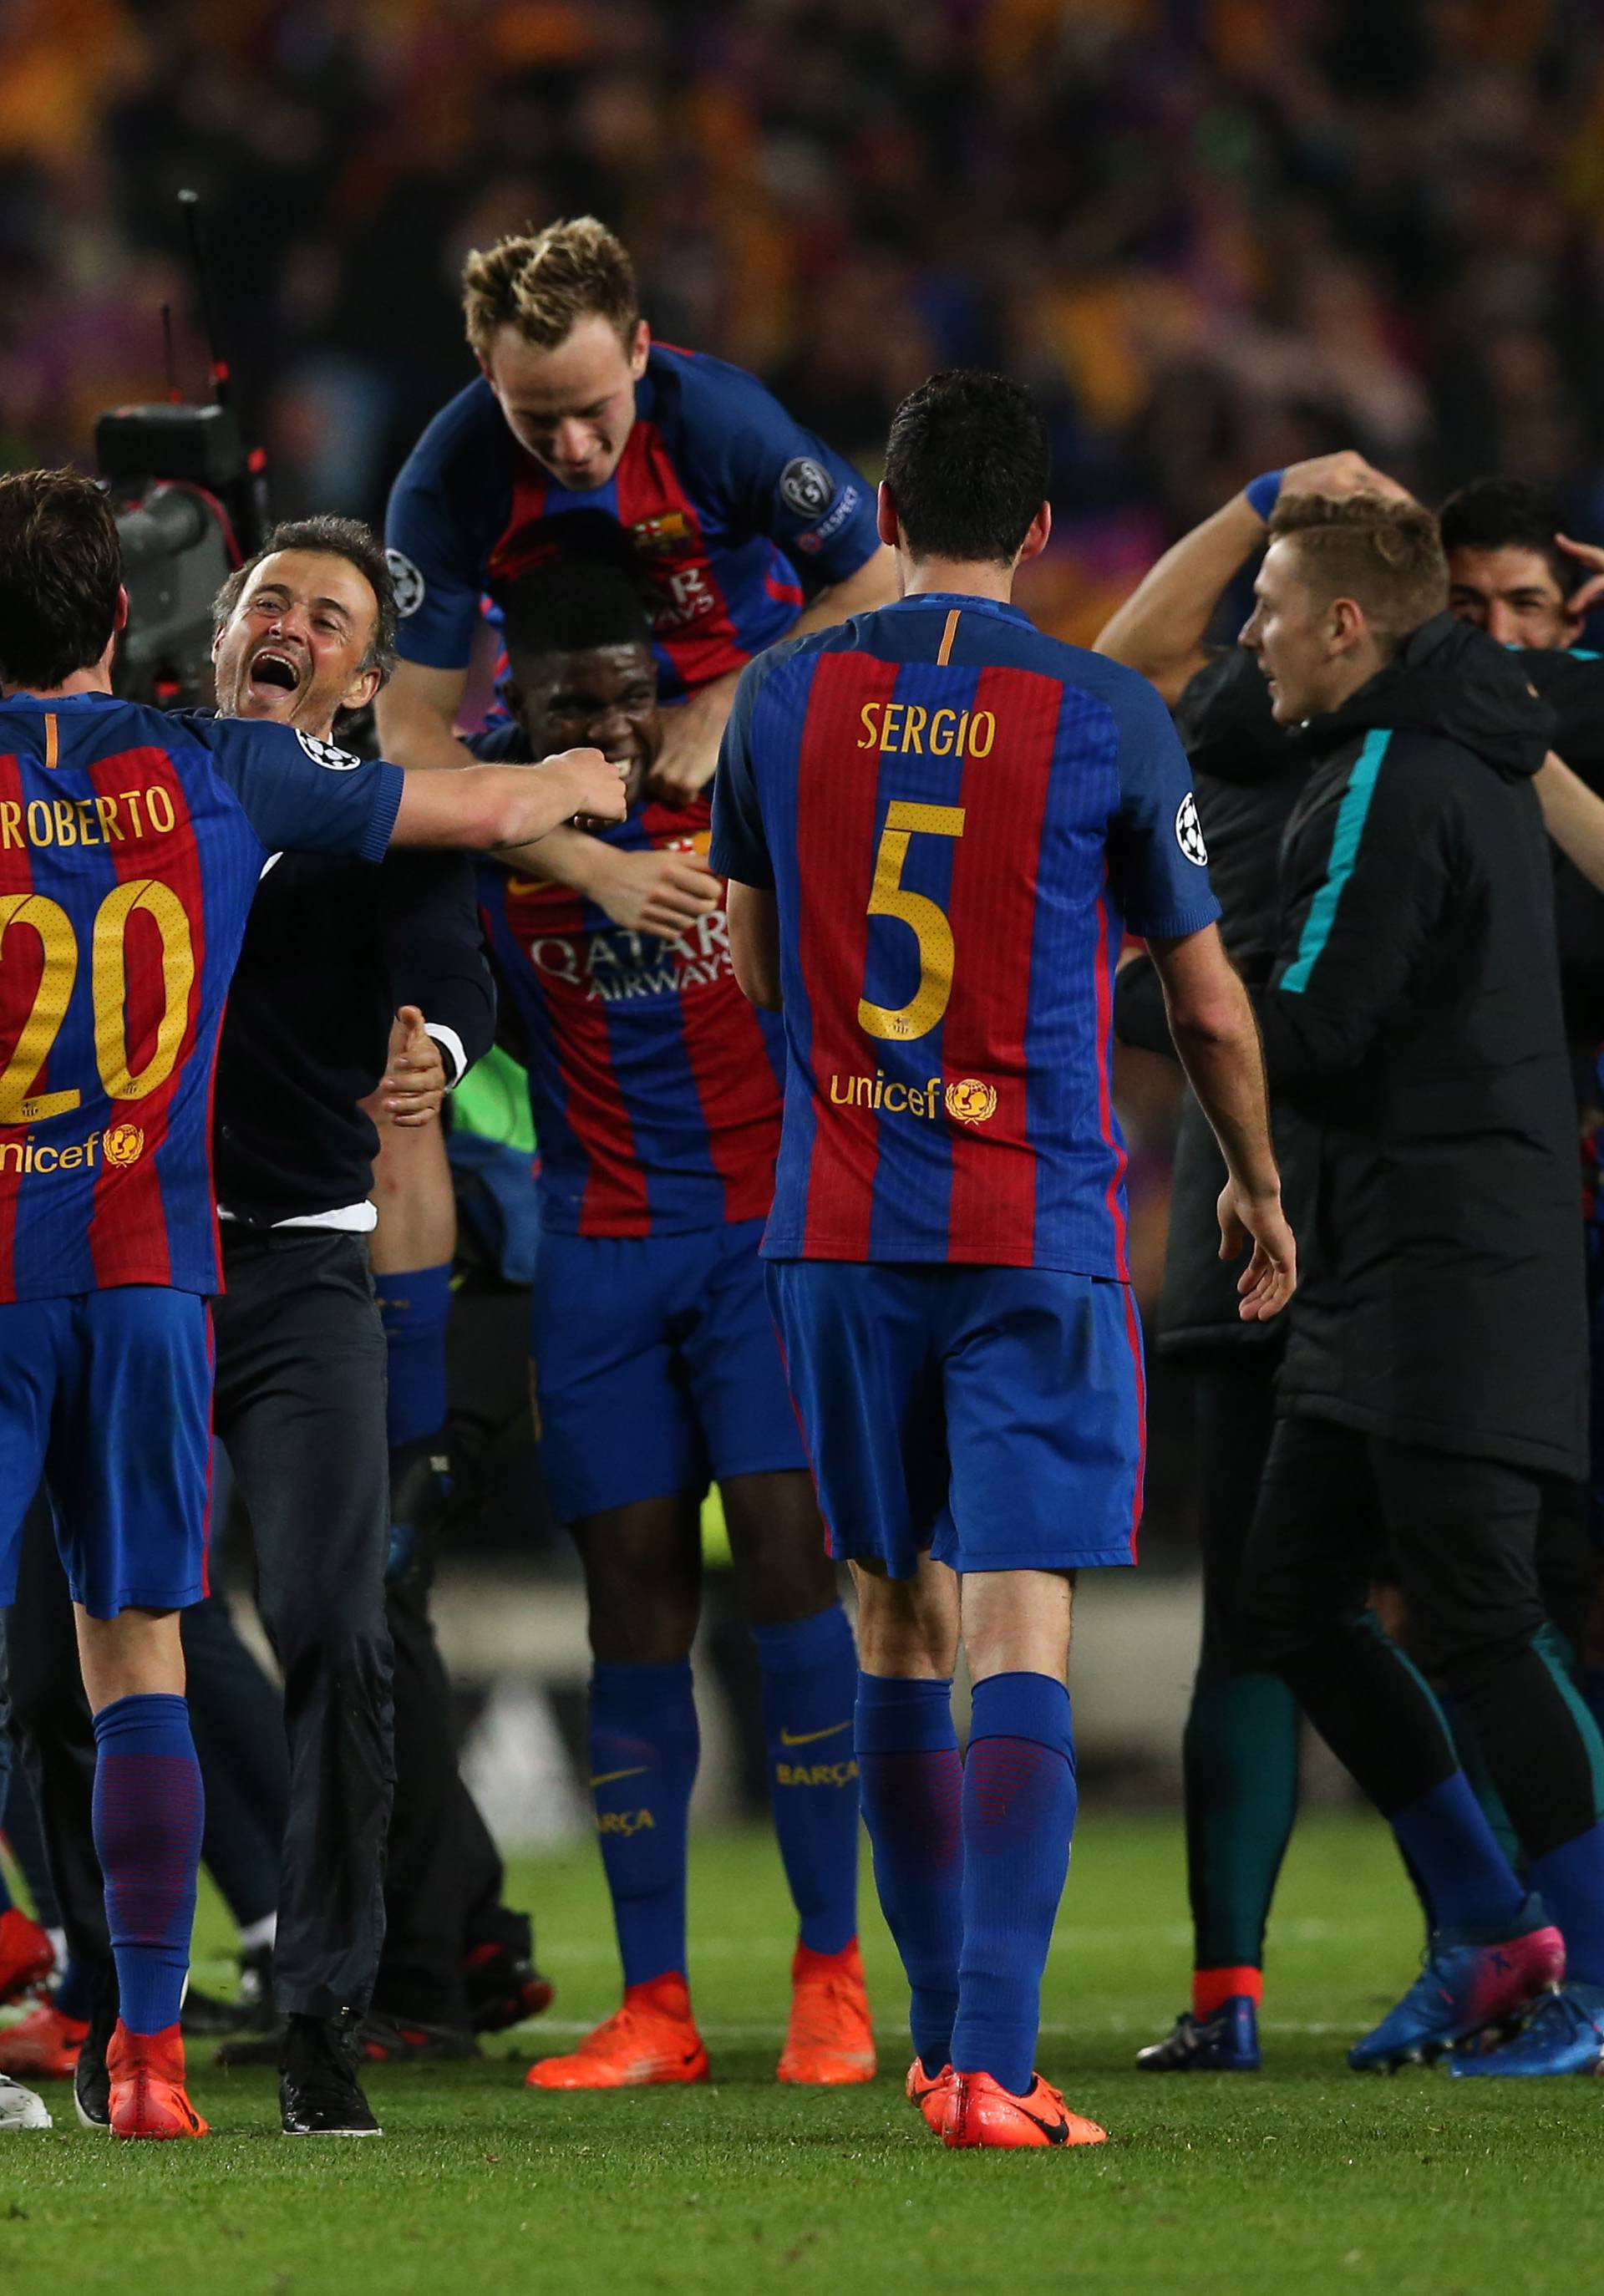 Barcelona coach Luis Enrique and Sergi Roberto celebrate after the game